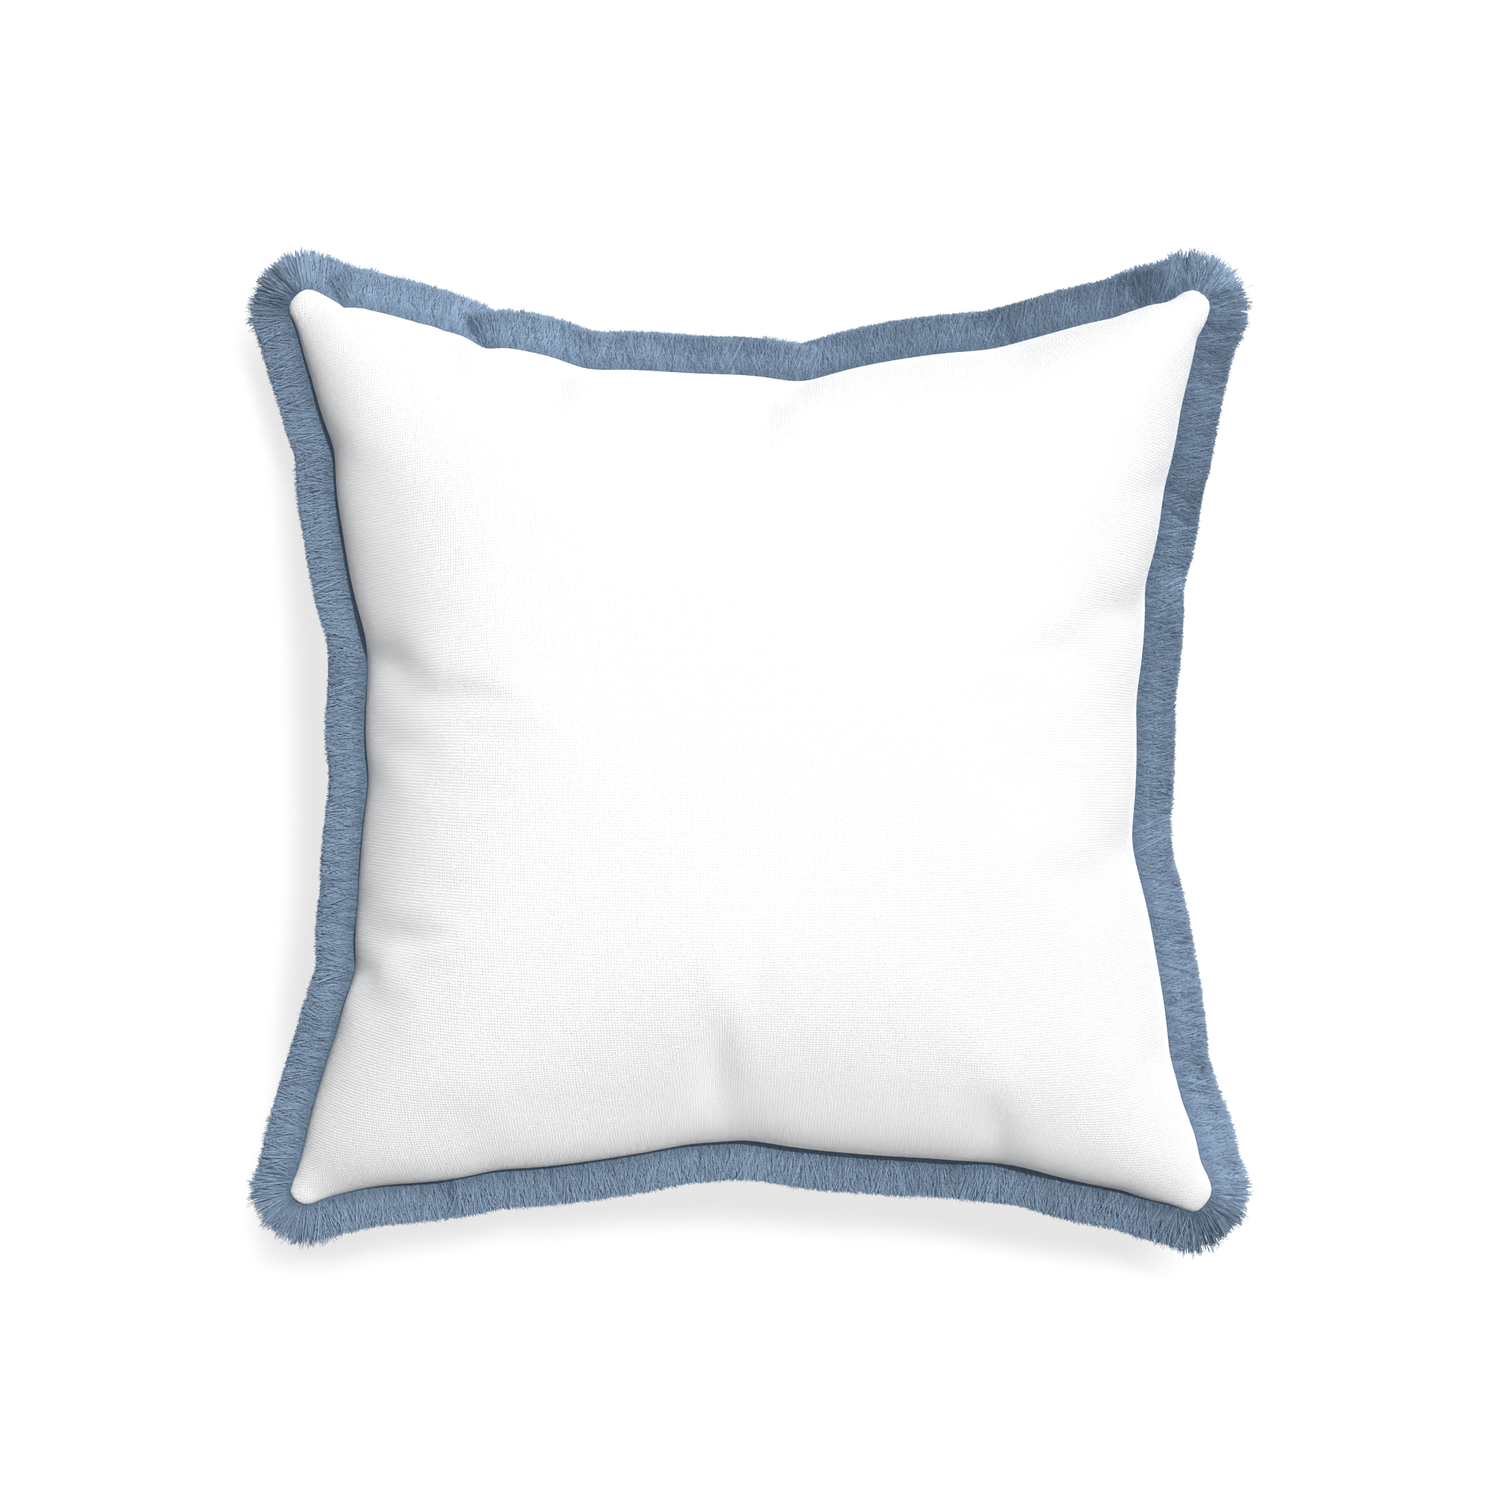 20-square snow custom pillow with sky fringe on white background